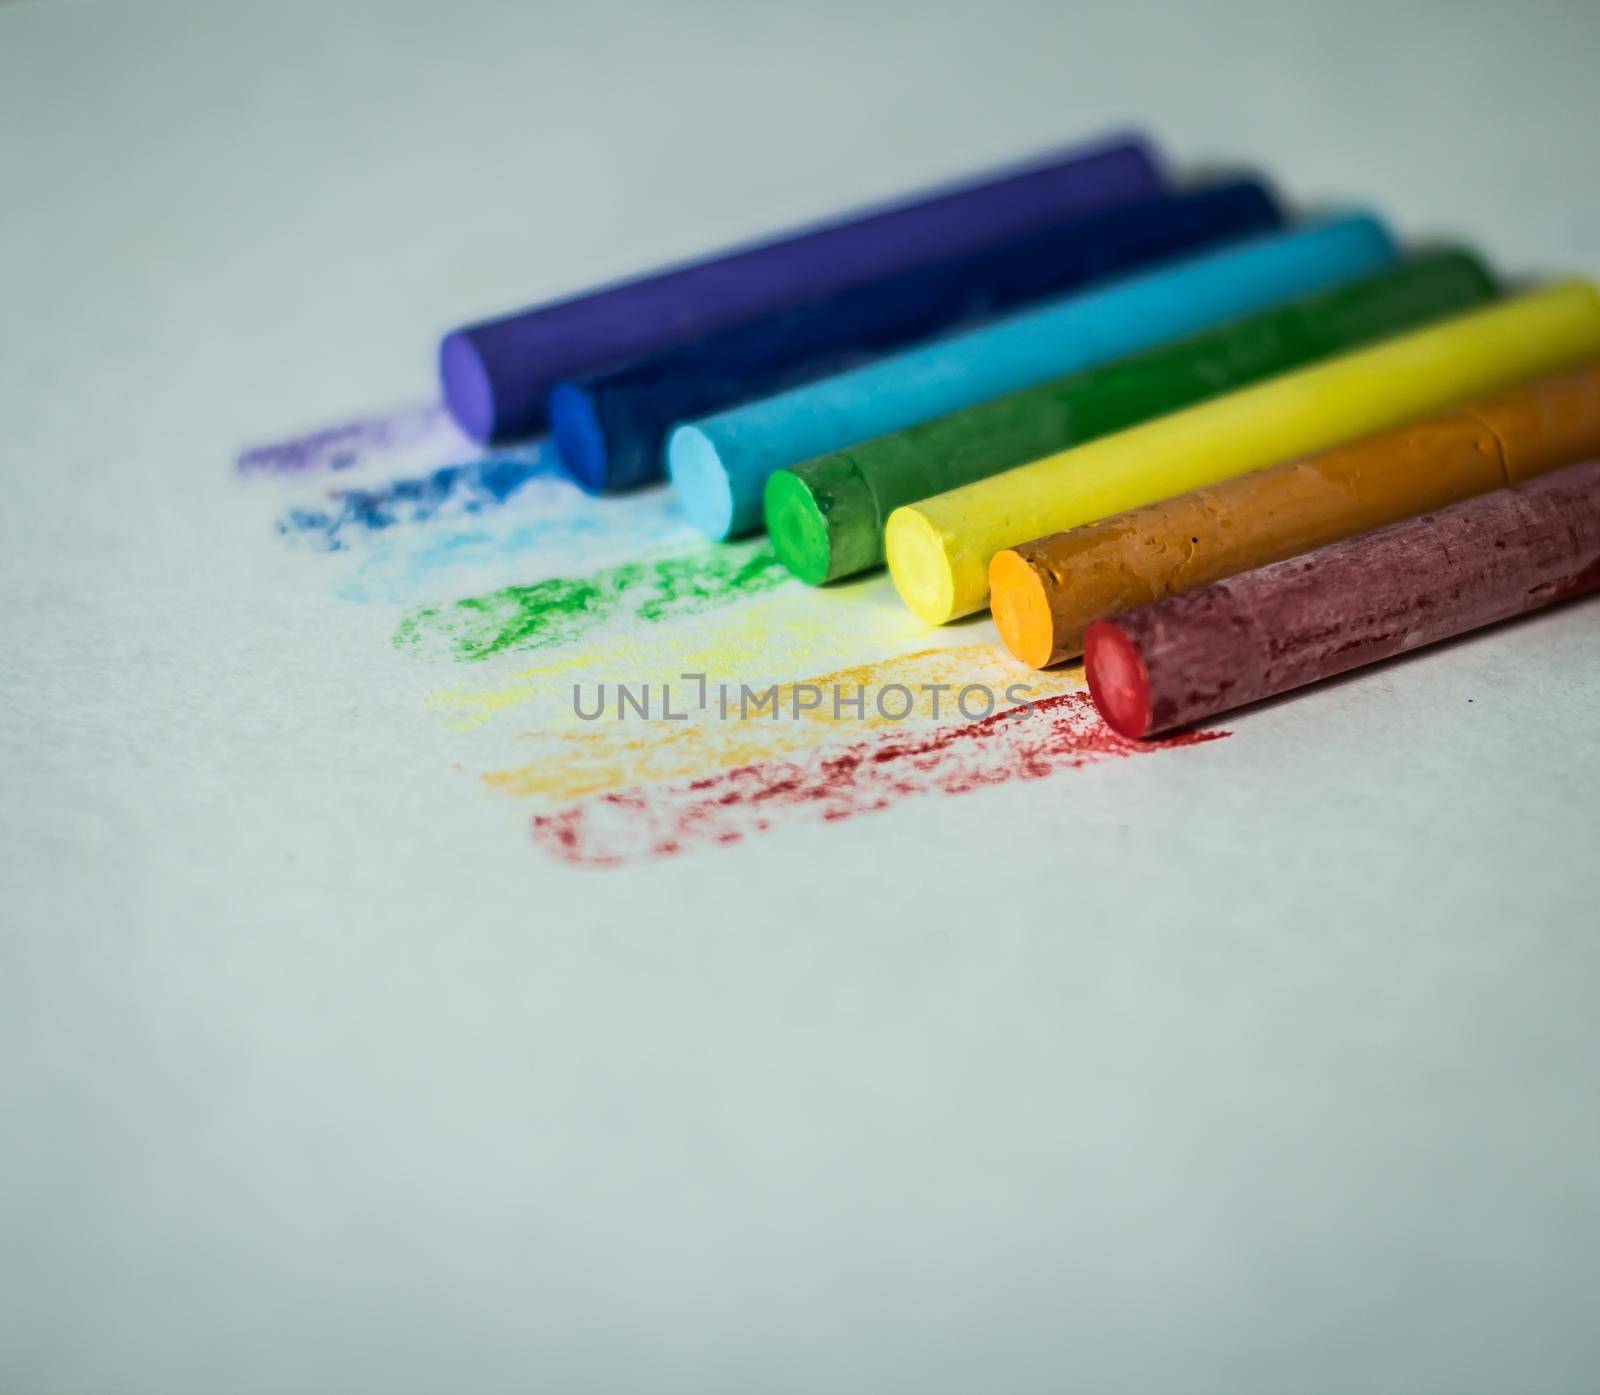 ulticolored crayons for drawing.isolated on a white background by SmartPhotoLab